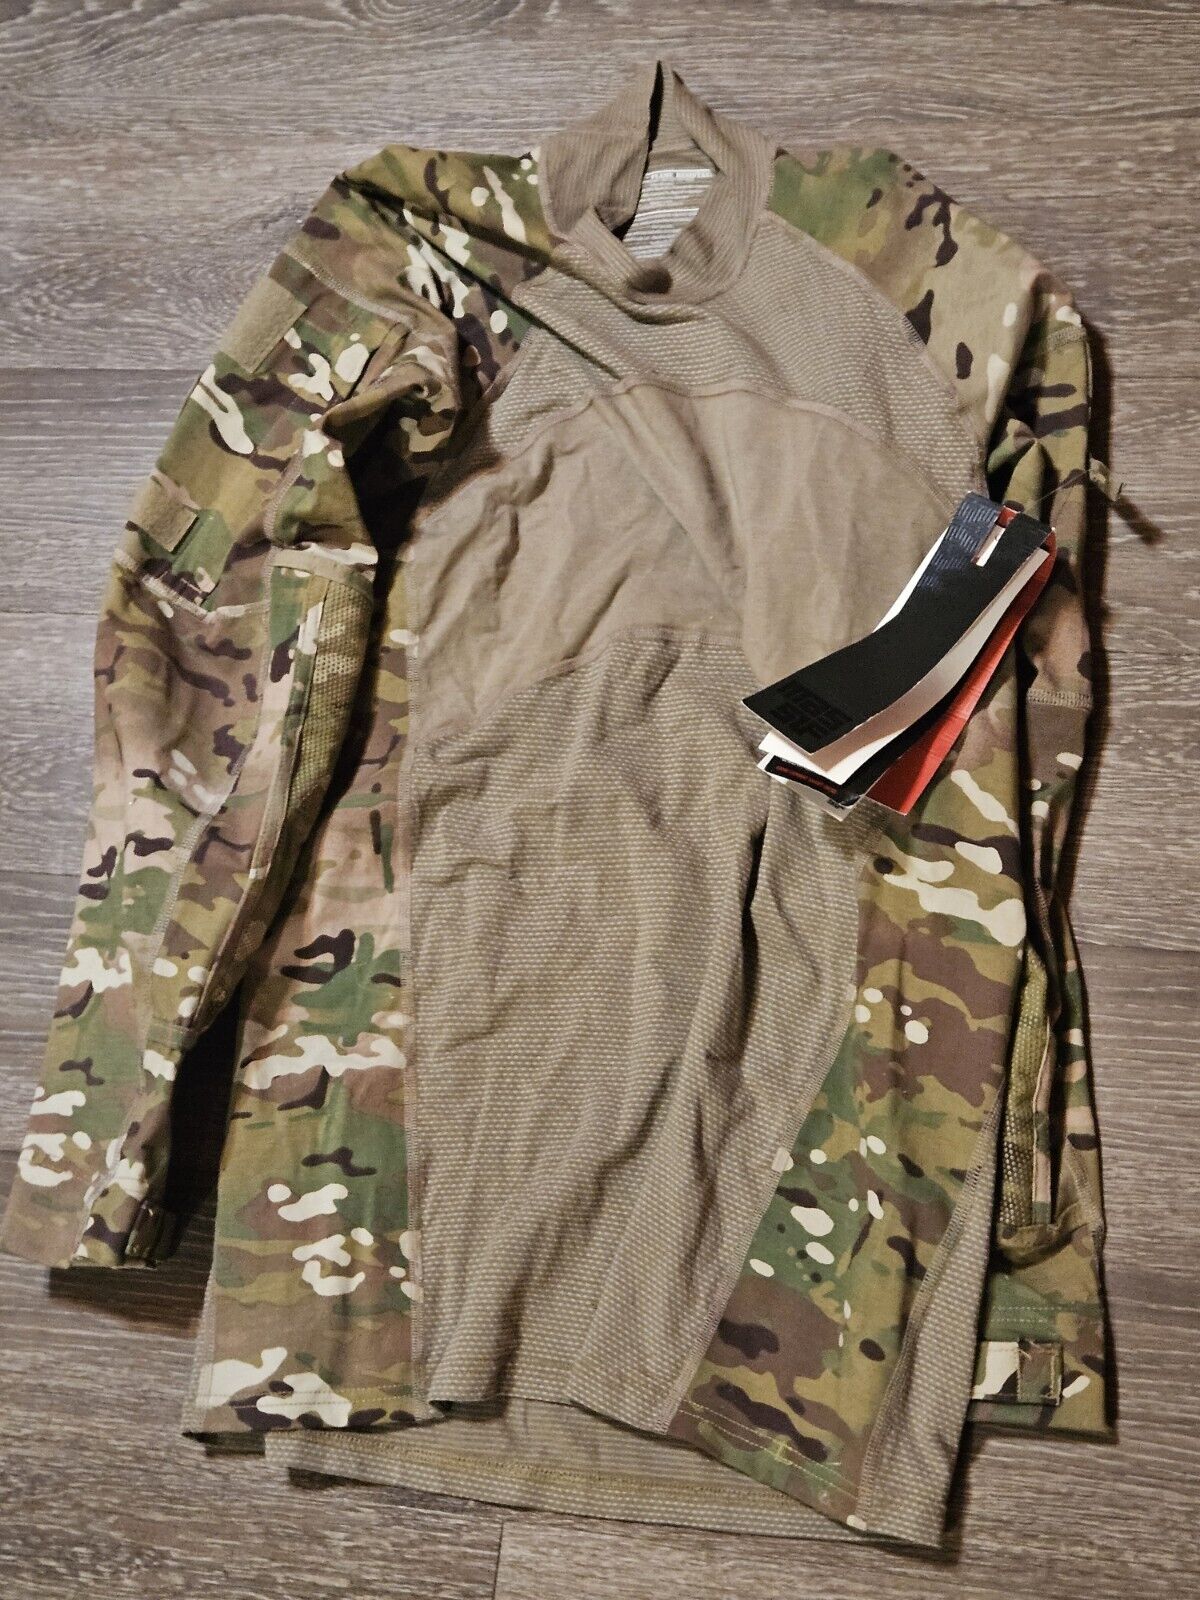 Army Combat Shirt (ACS), Multicam MED, Flame-Resistant, 8415-01-580-4853